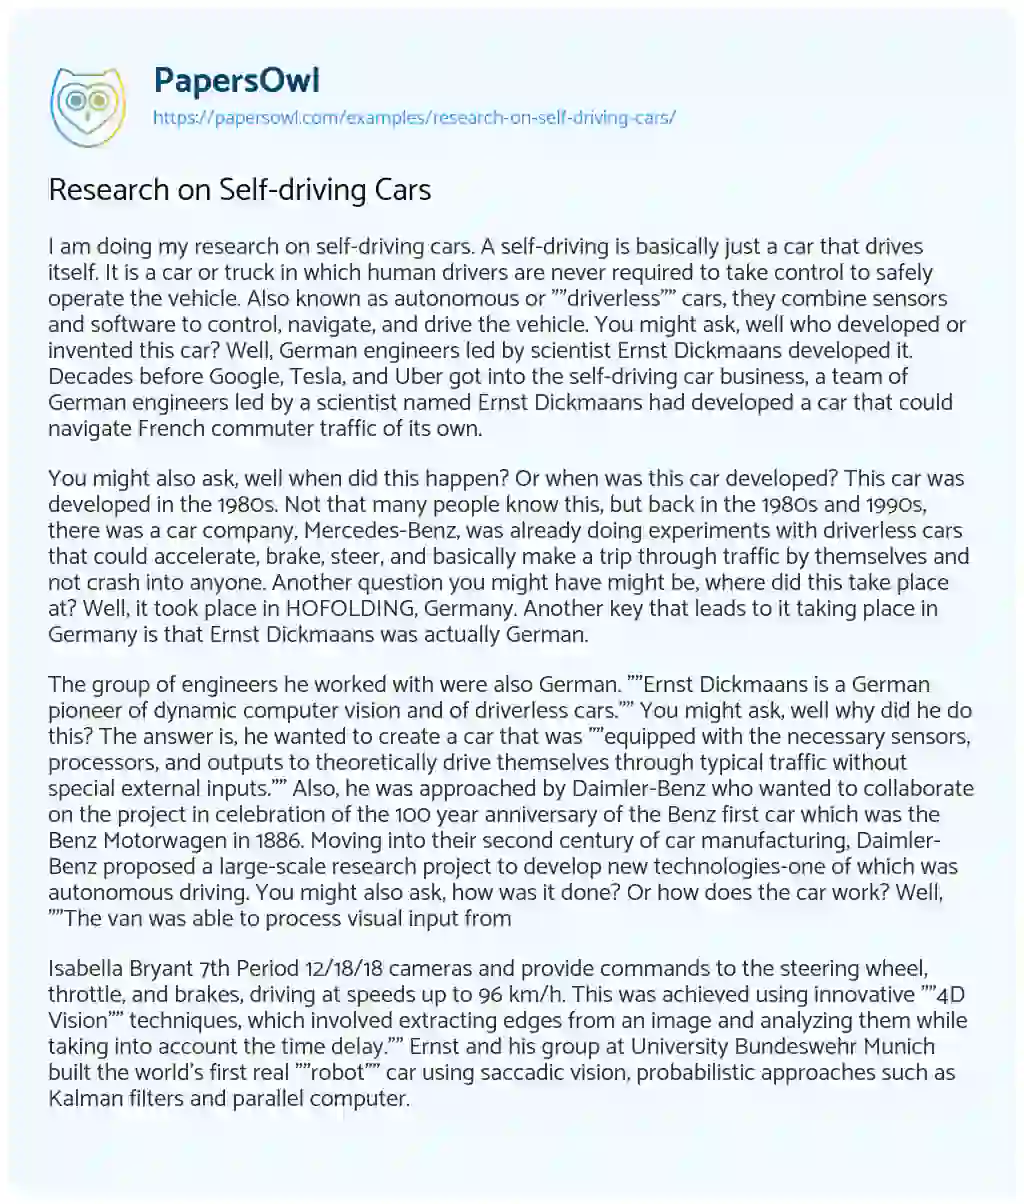 Essay on Research on Self-driving Cars